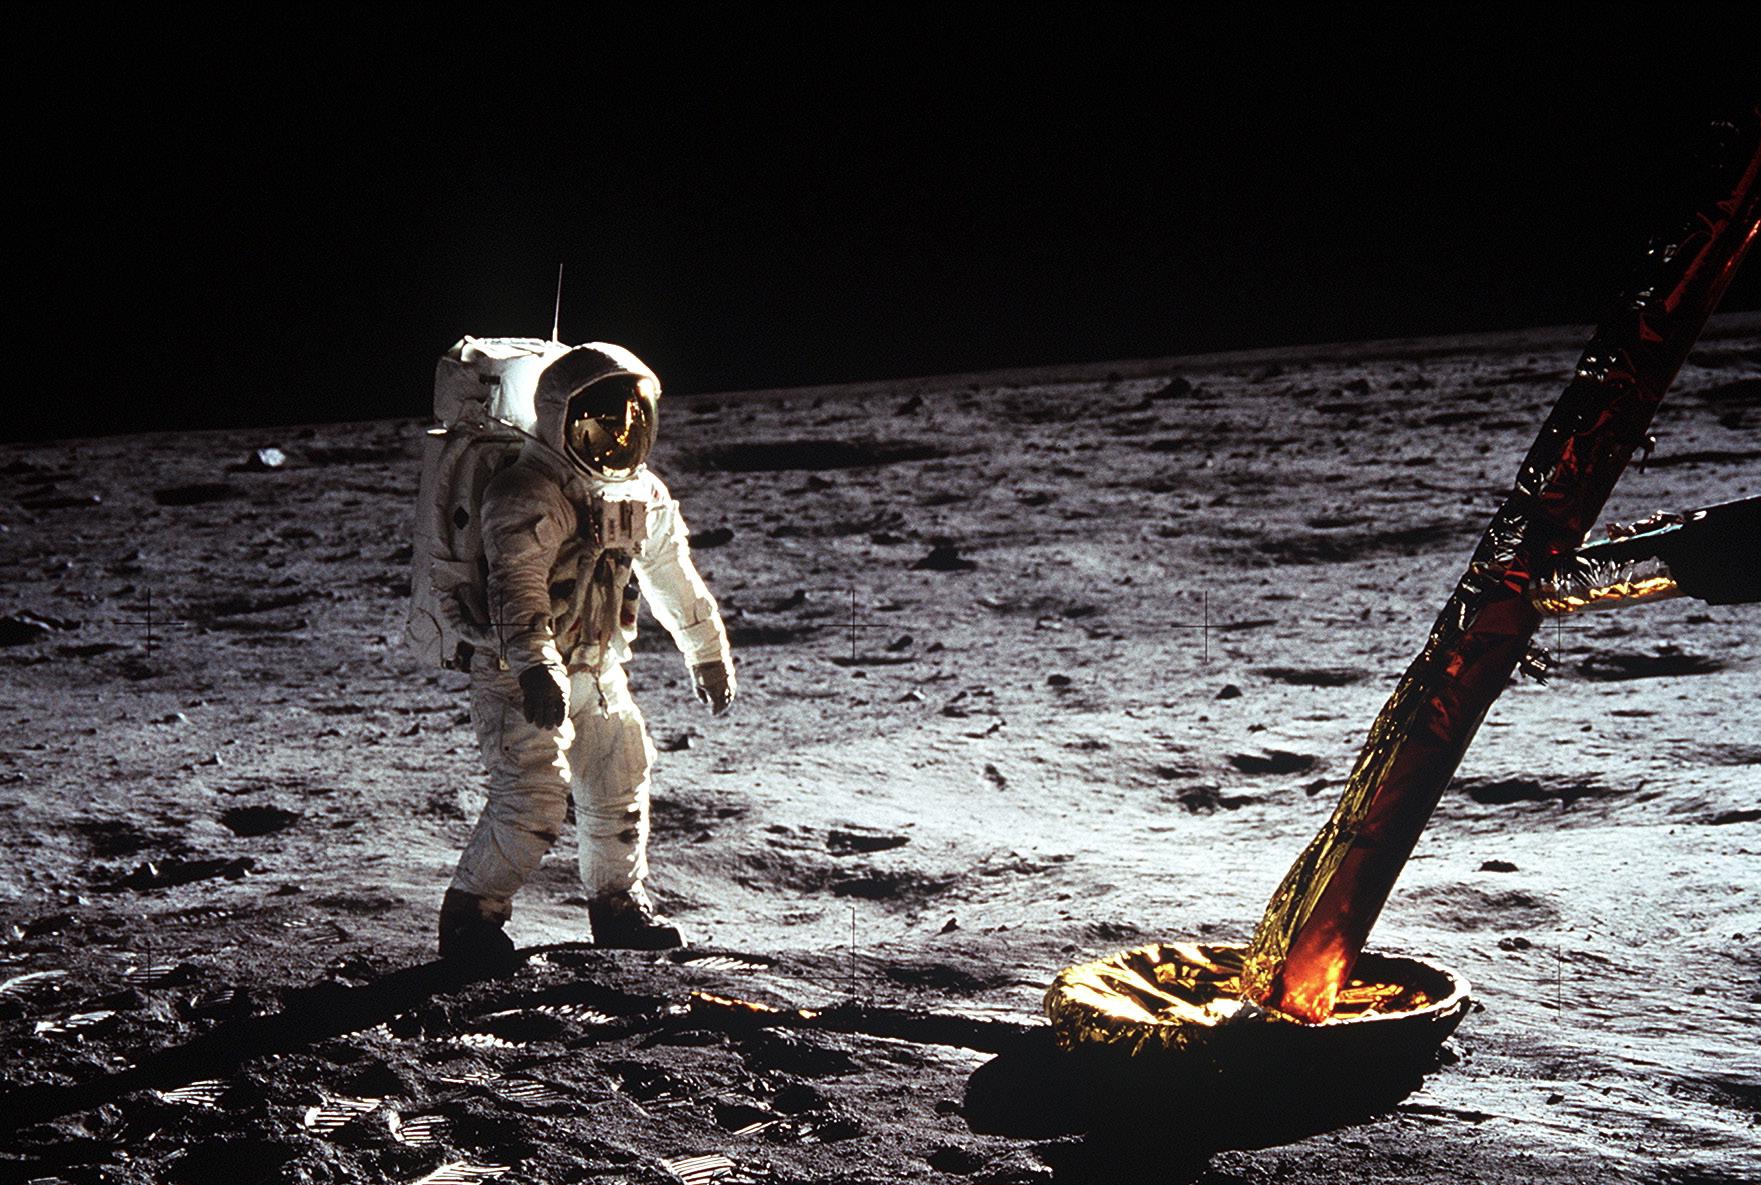 Man's first step on the moon. The 1969 Apollo 11 mission saw famed astronauts Neil Armstrong and Buzz Aldrin walk their first steps on the moon with the Omega Speedmaster Professional strapped on their wrists. 